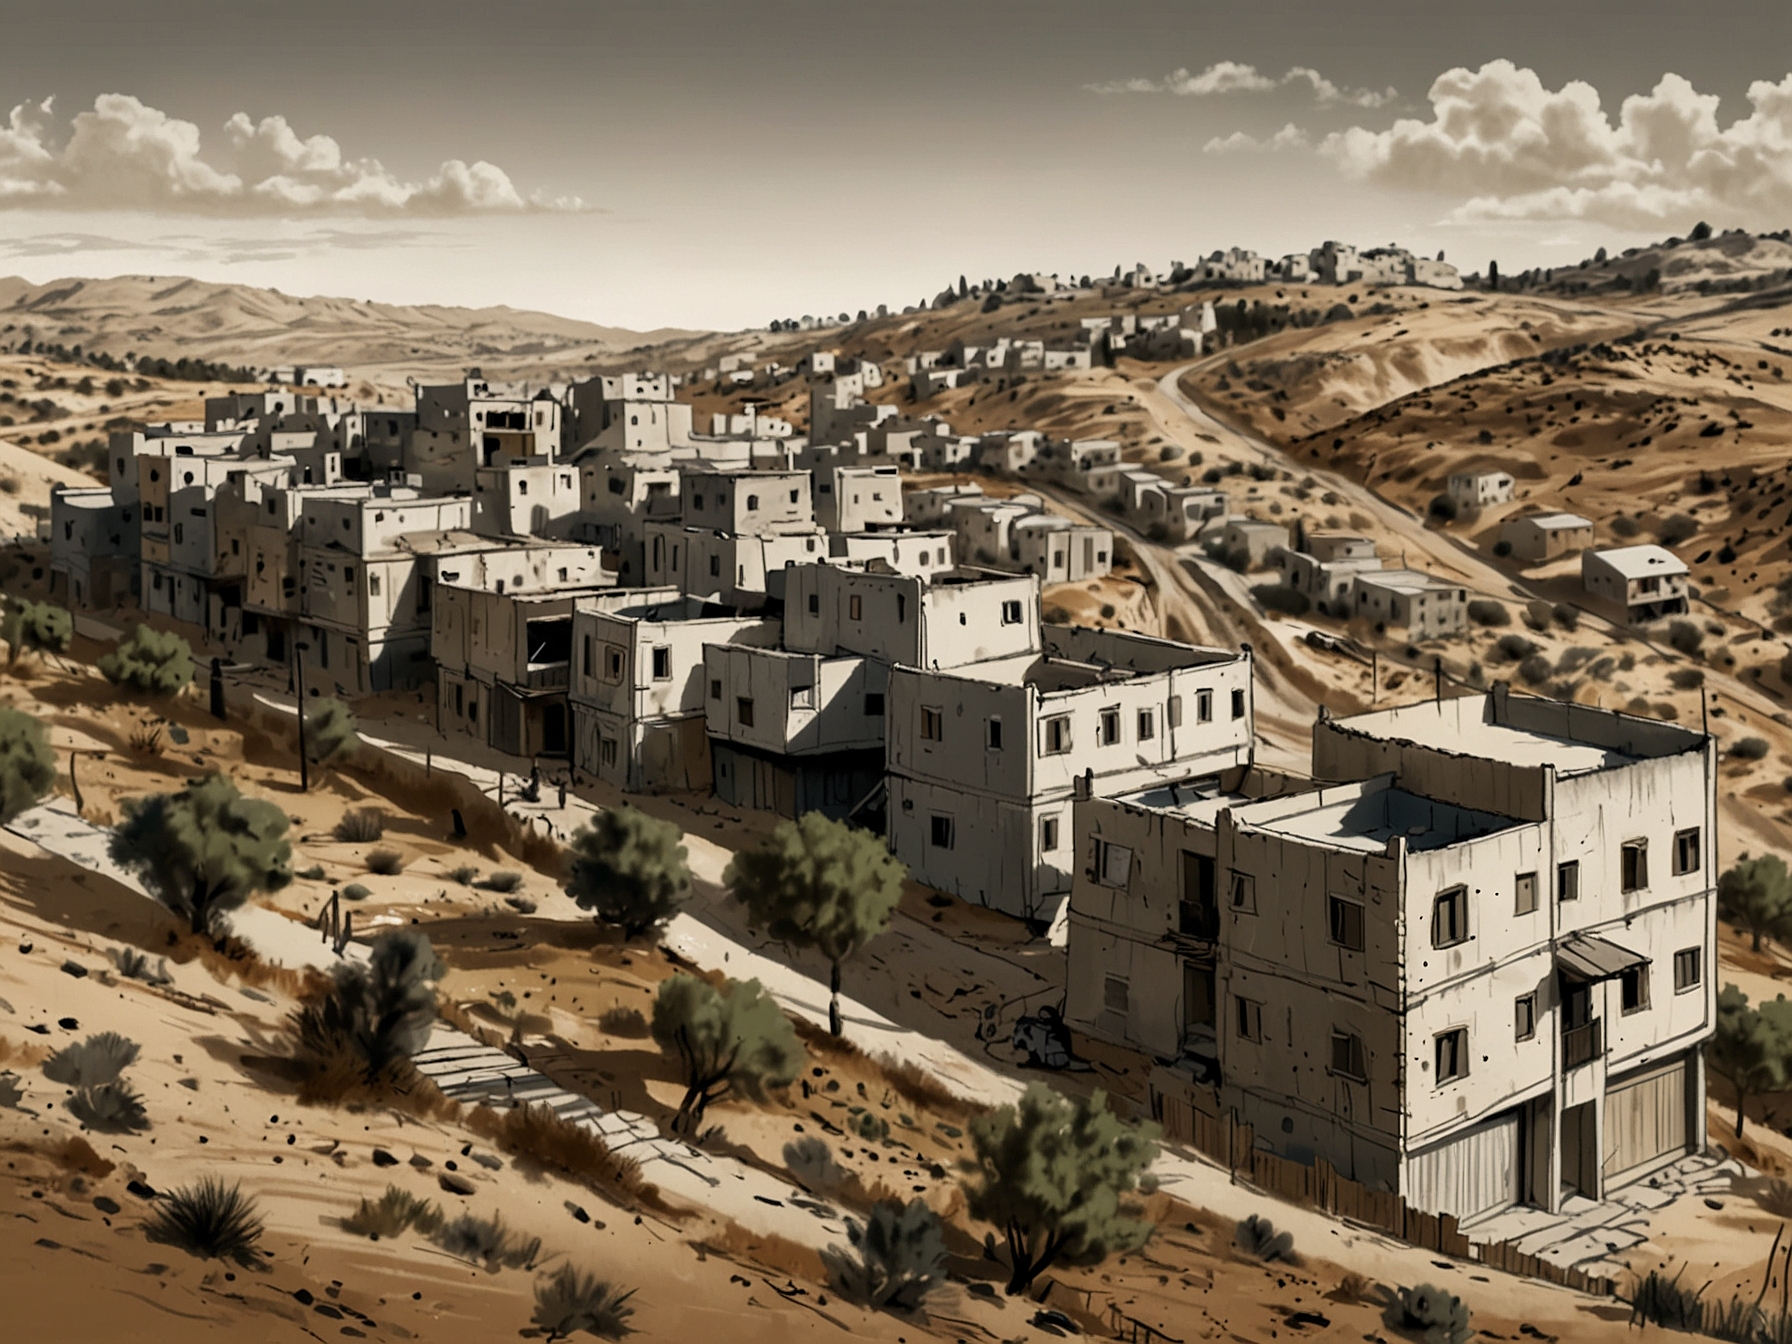 A visual representation of Israeli settlements in the West Bank, highlighting the controversial expansions. The image serves to illustrate one of the main points of contention in U.S.-Israel relations.